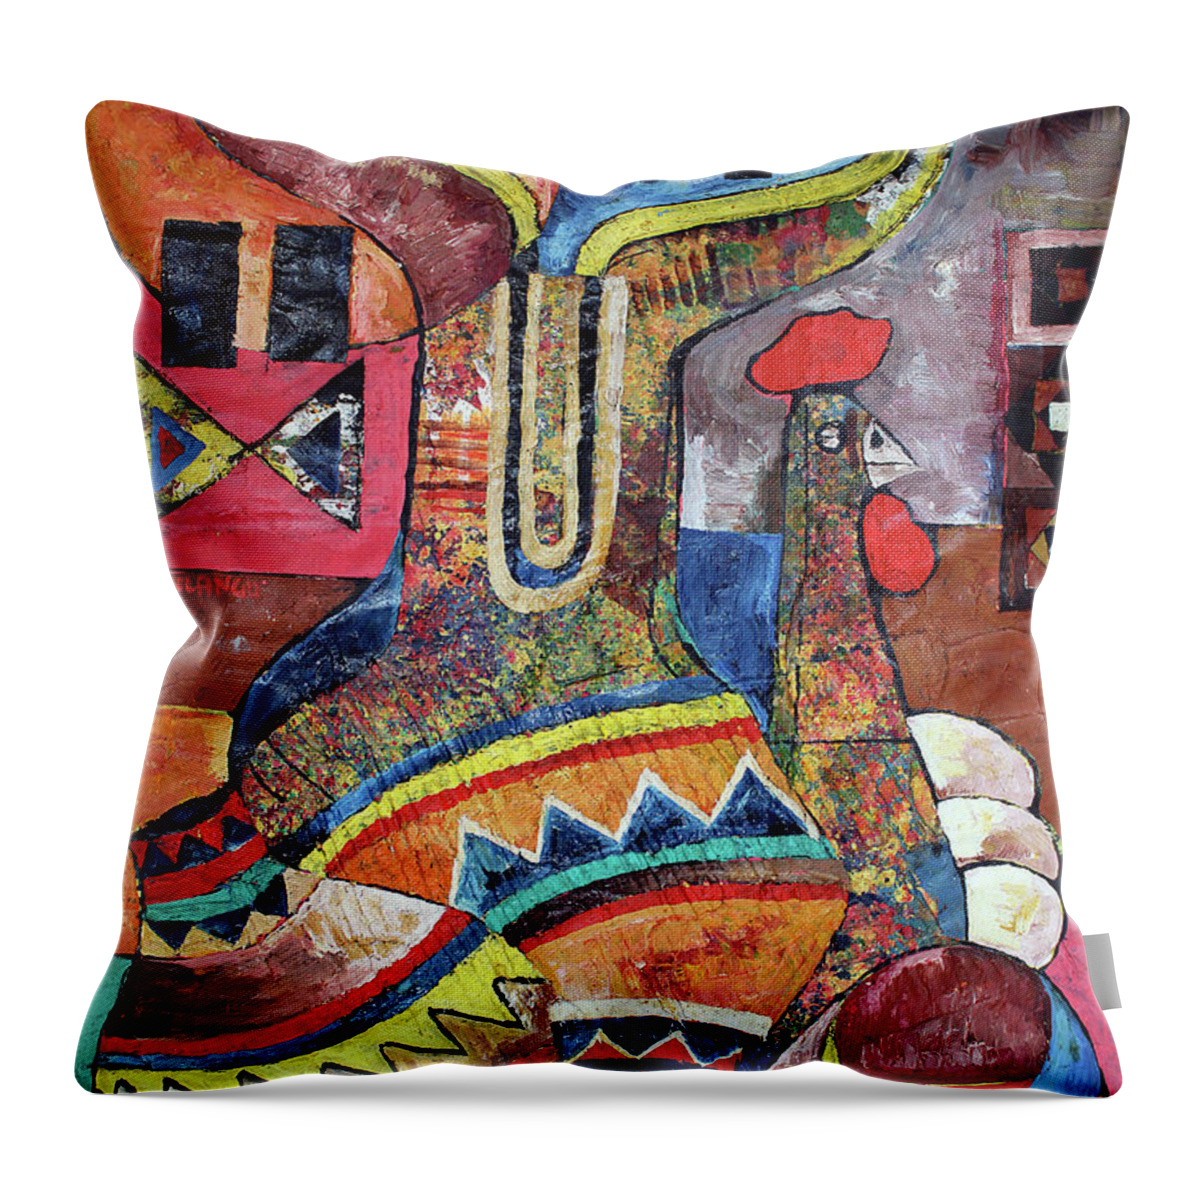  Throw Pillow featuring the painting Bright Sunny Day by Speelman Mahlangu